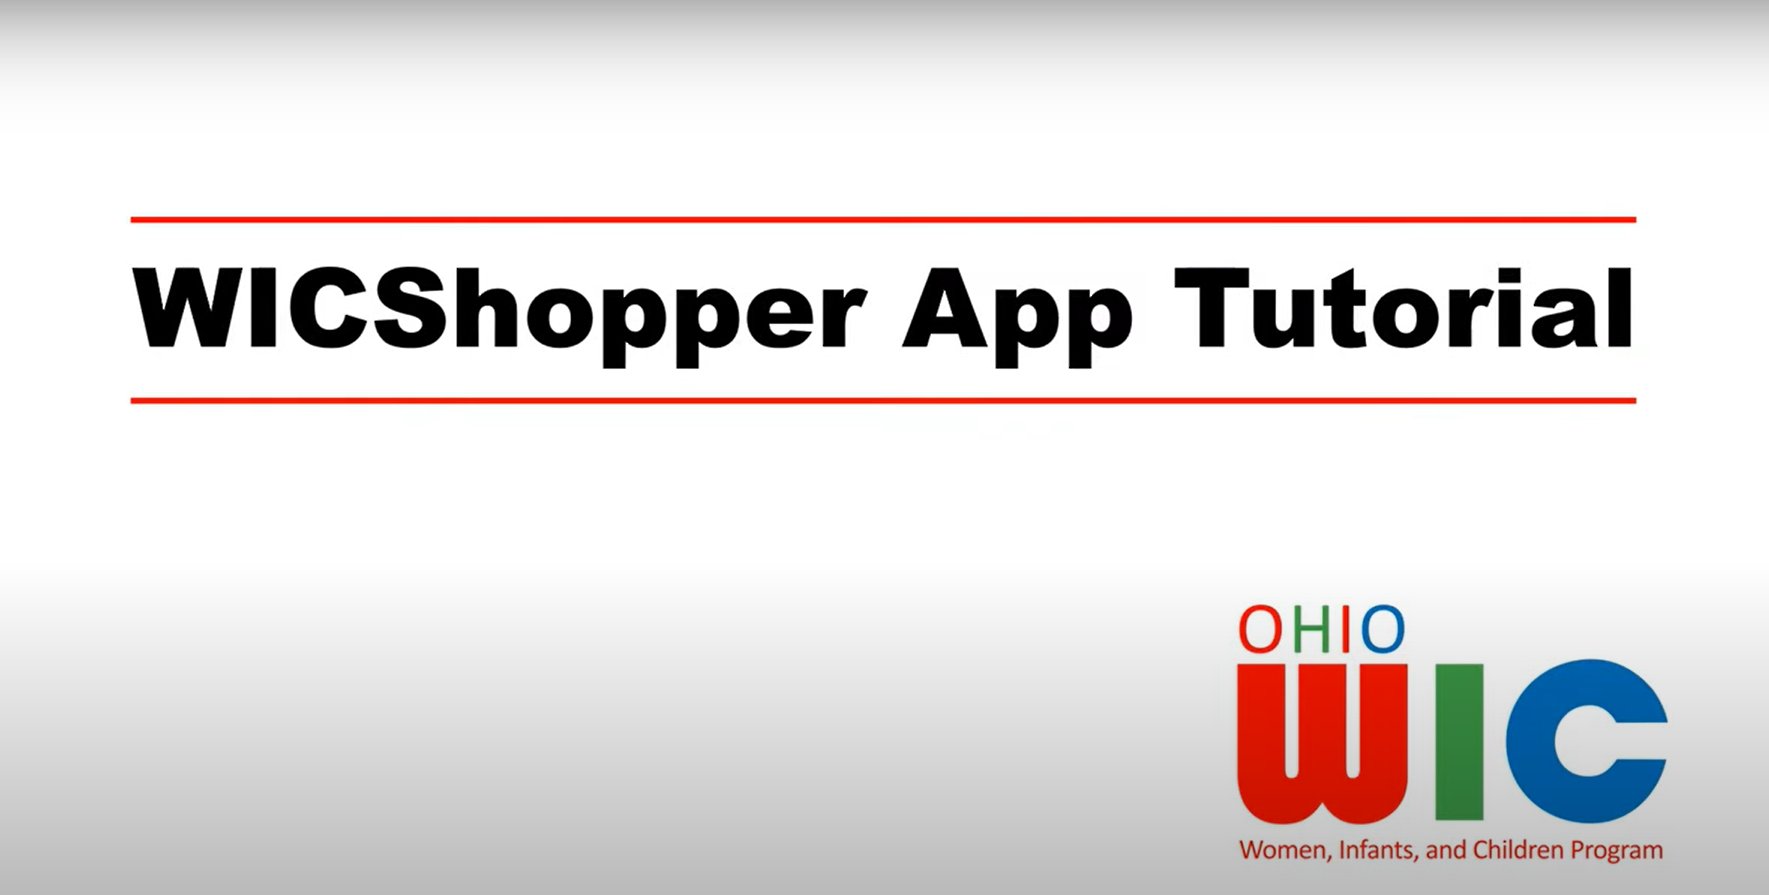 a title page that says "WICShopper App Tutorial"